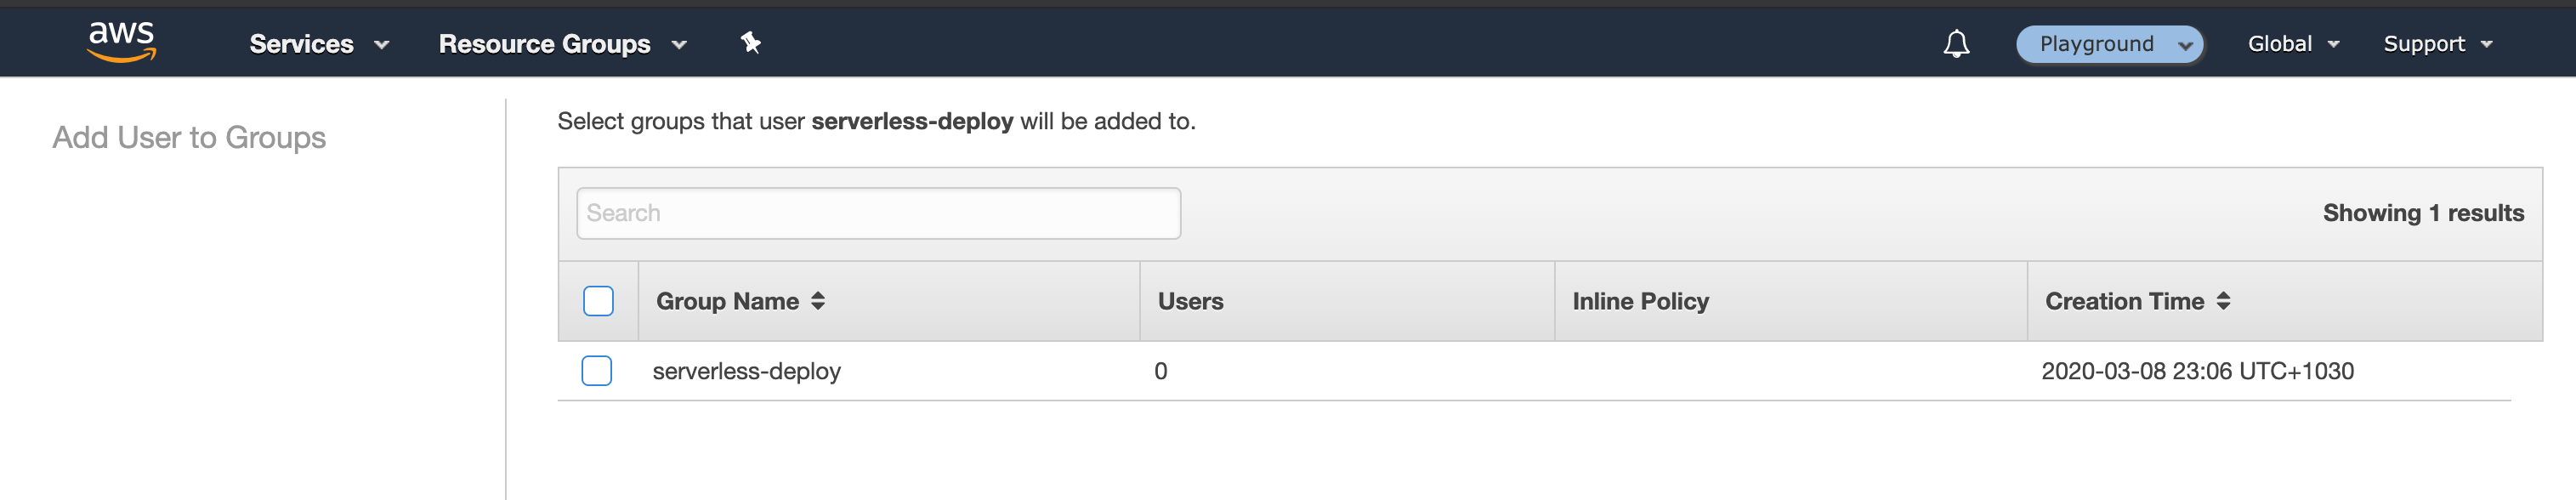 AWS Console — IAM User Add user to groups